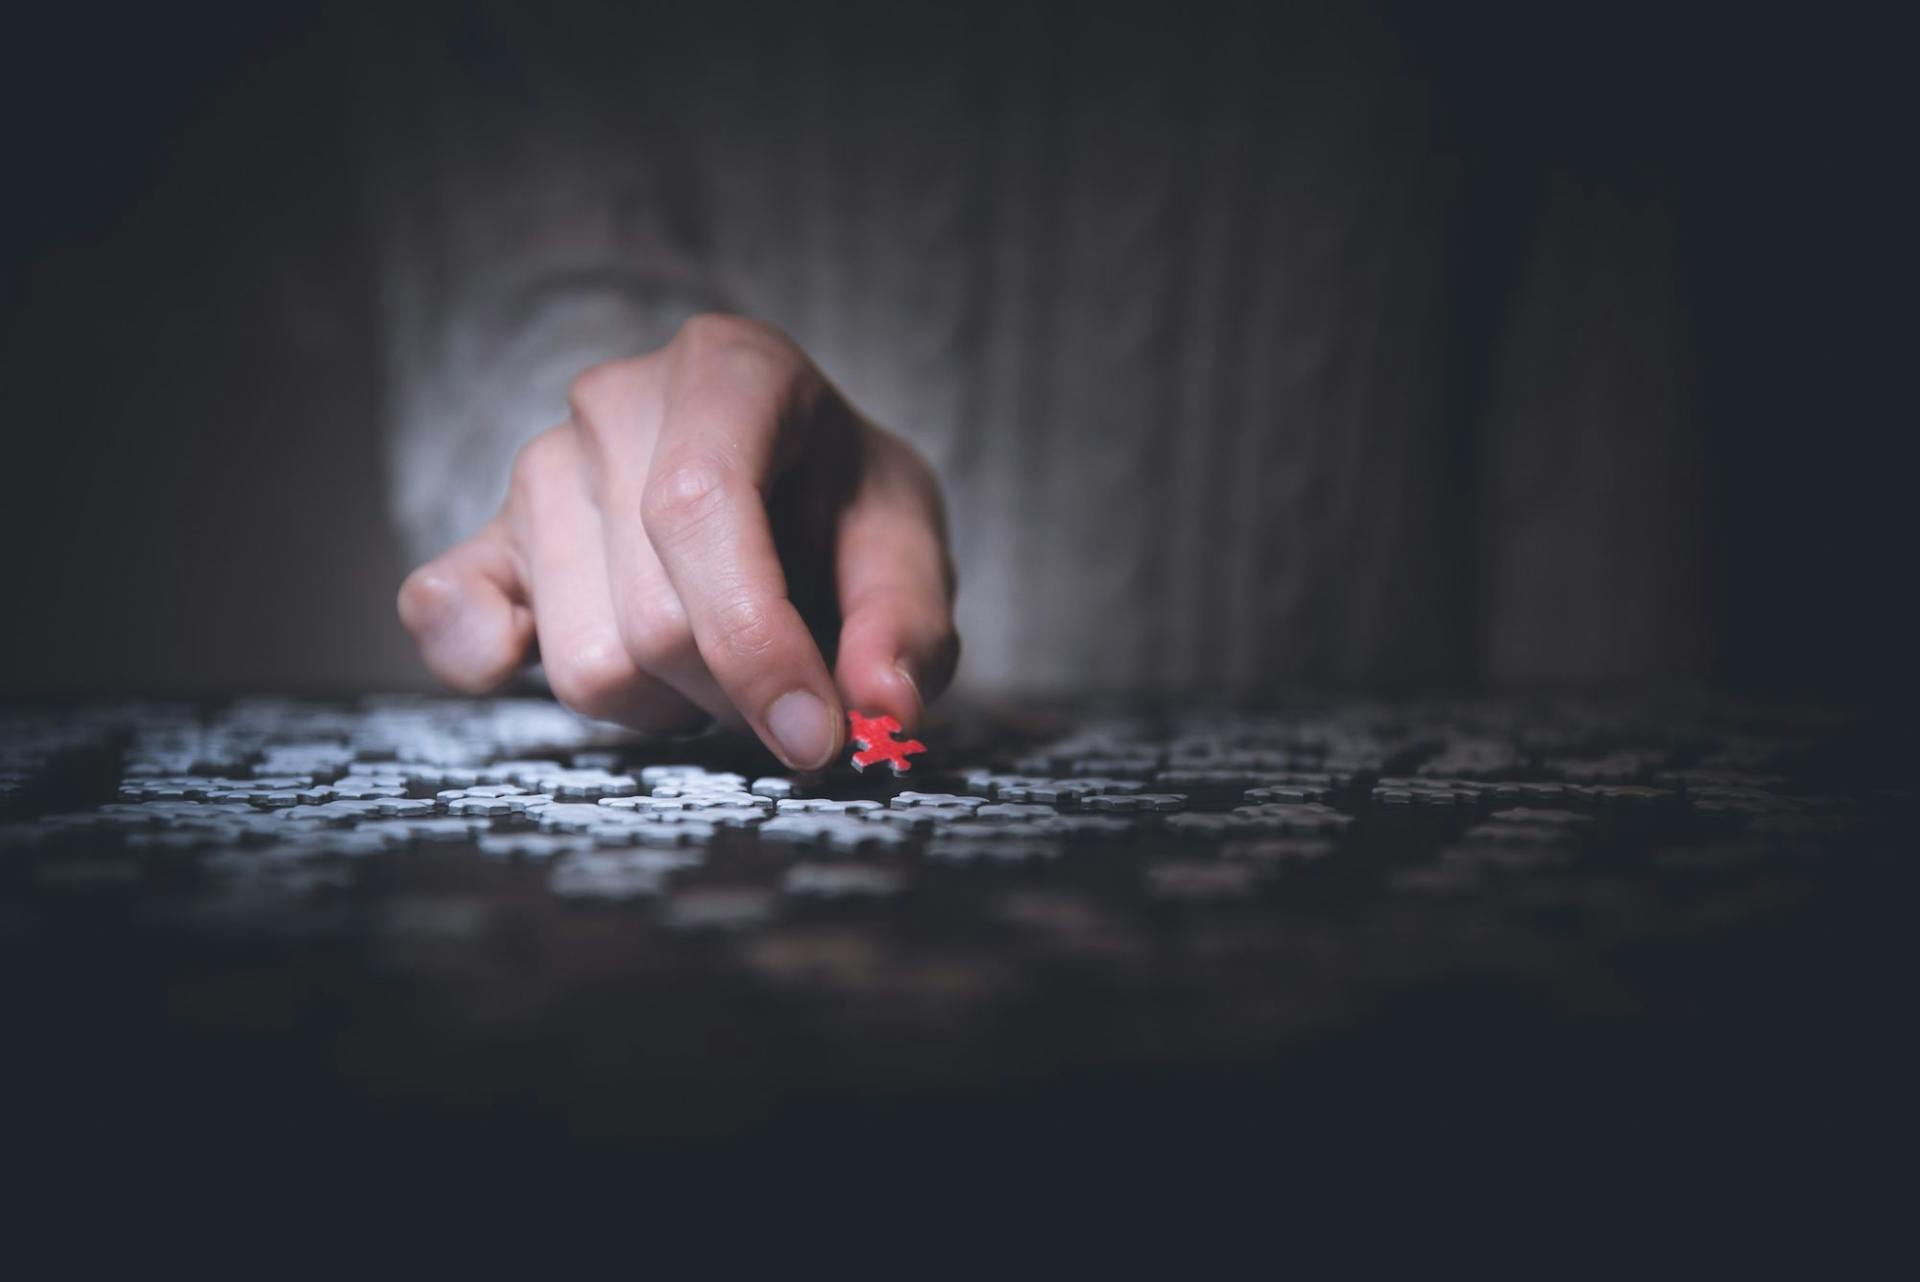 New Study Reveals Puzzles and Brain Training May Not ‘Stop Mental Decline’